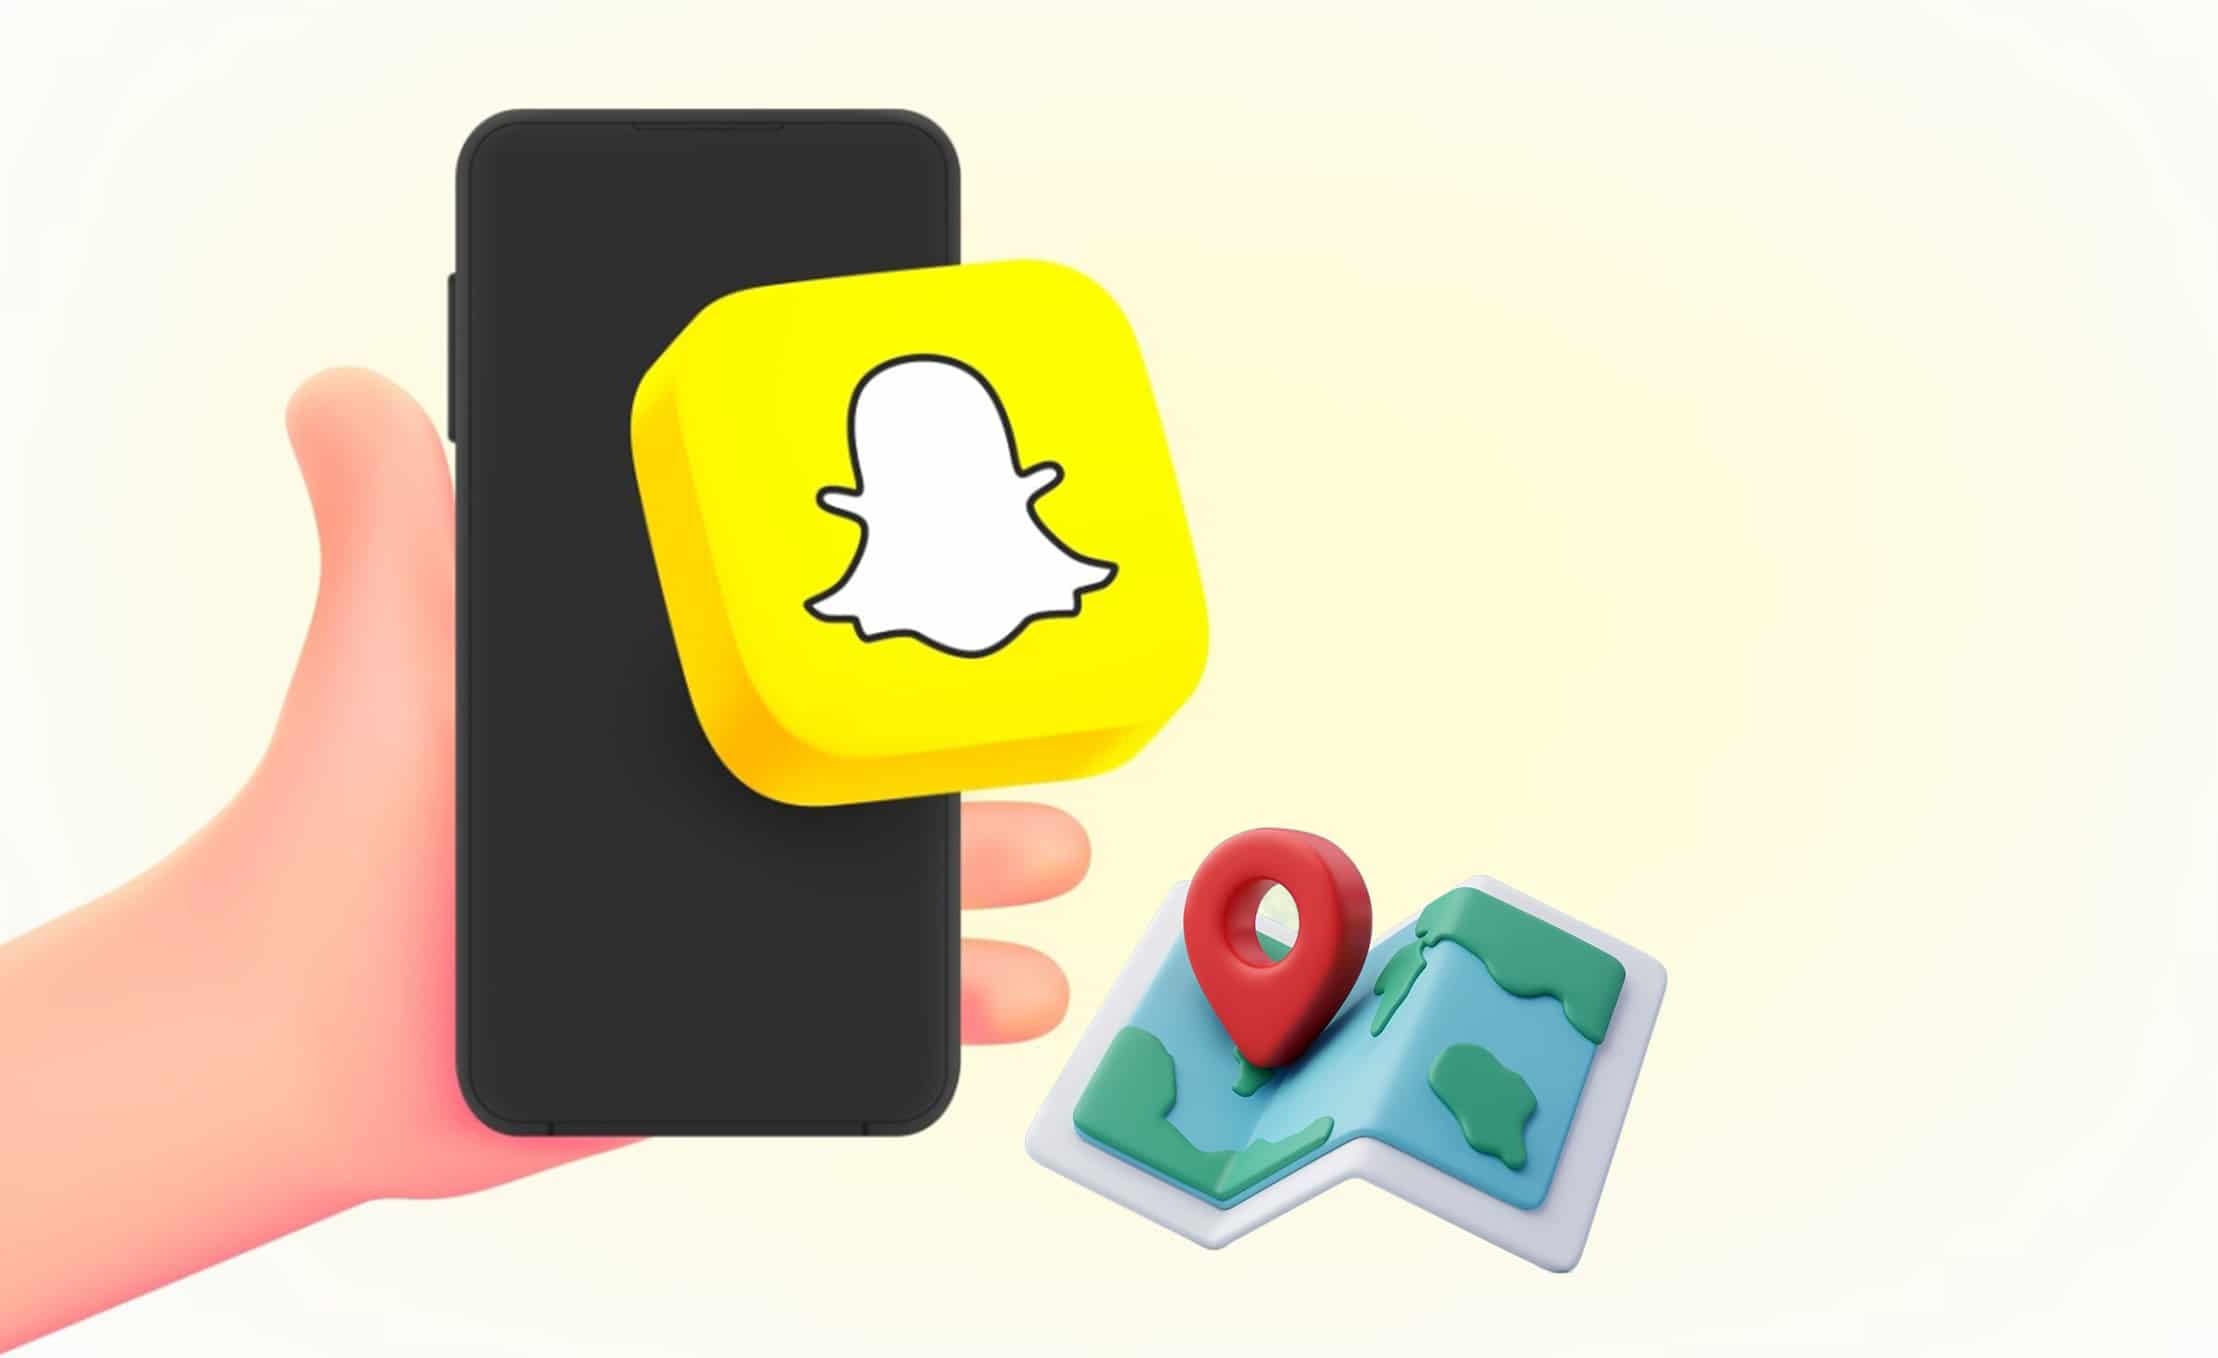 How to Turn Off Location on Snapchat